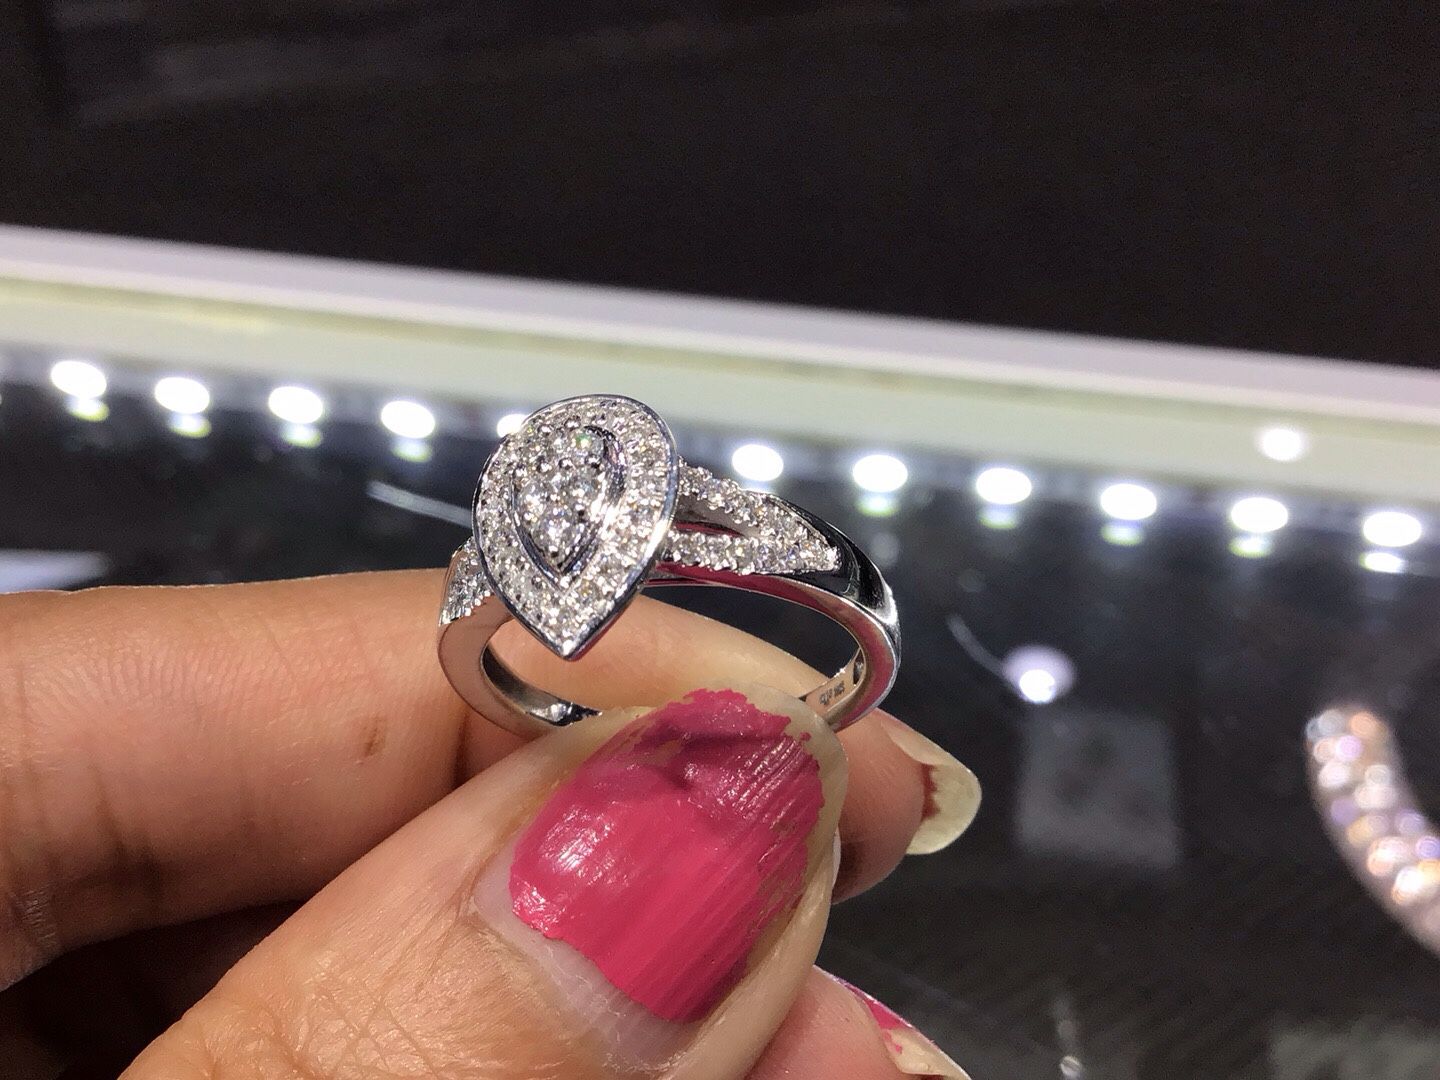 10k White Gold Diamond  Ring Lady’s Size 7 Available In Stock .💎💎💎